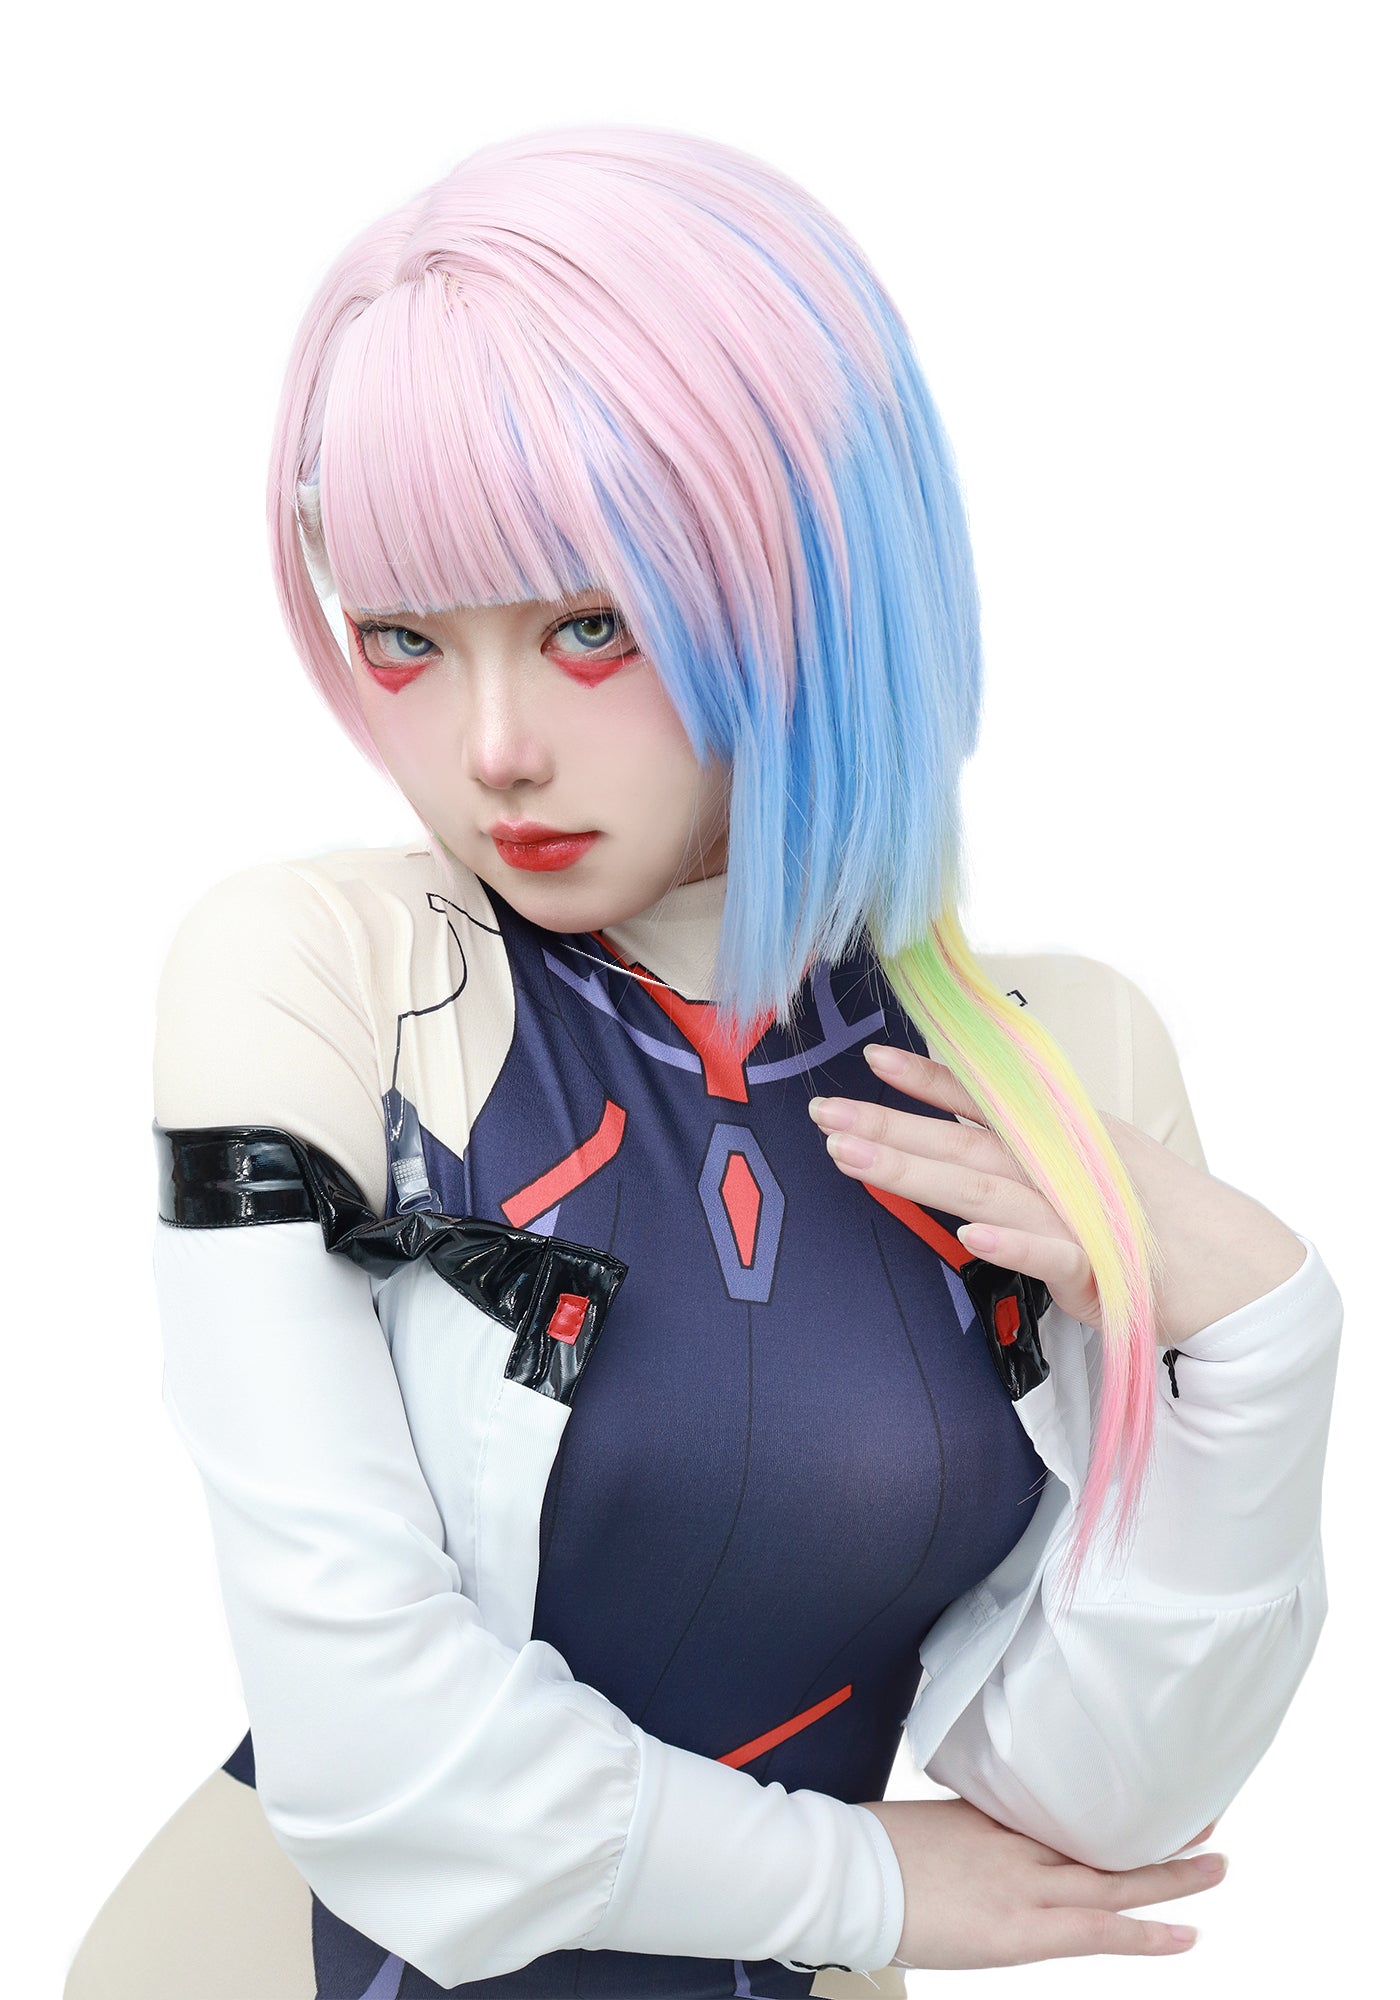 DAZCOS Lucy Cosplay Wig for Women Anime Halloween Costume (Pink-Blue)